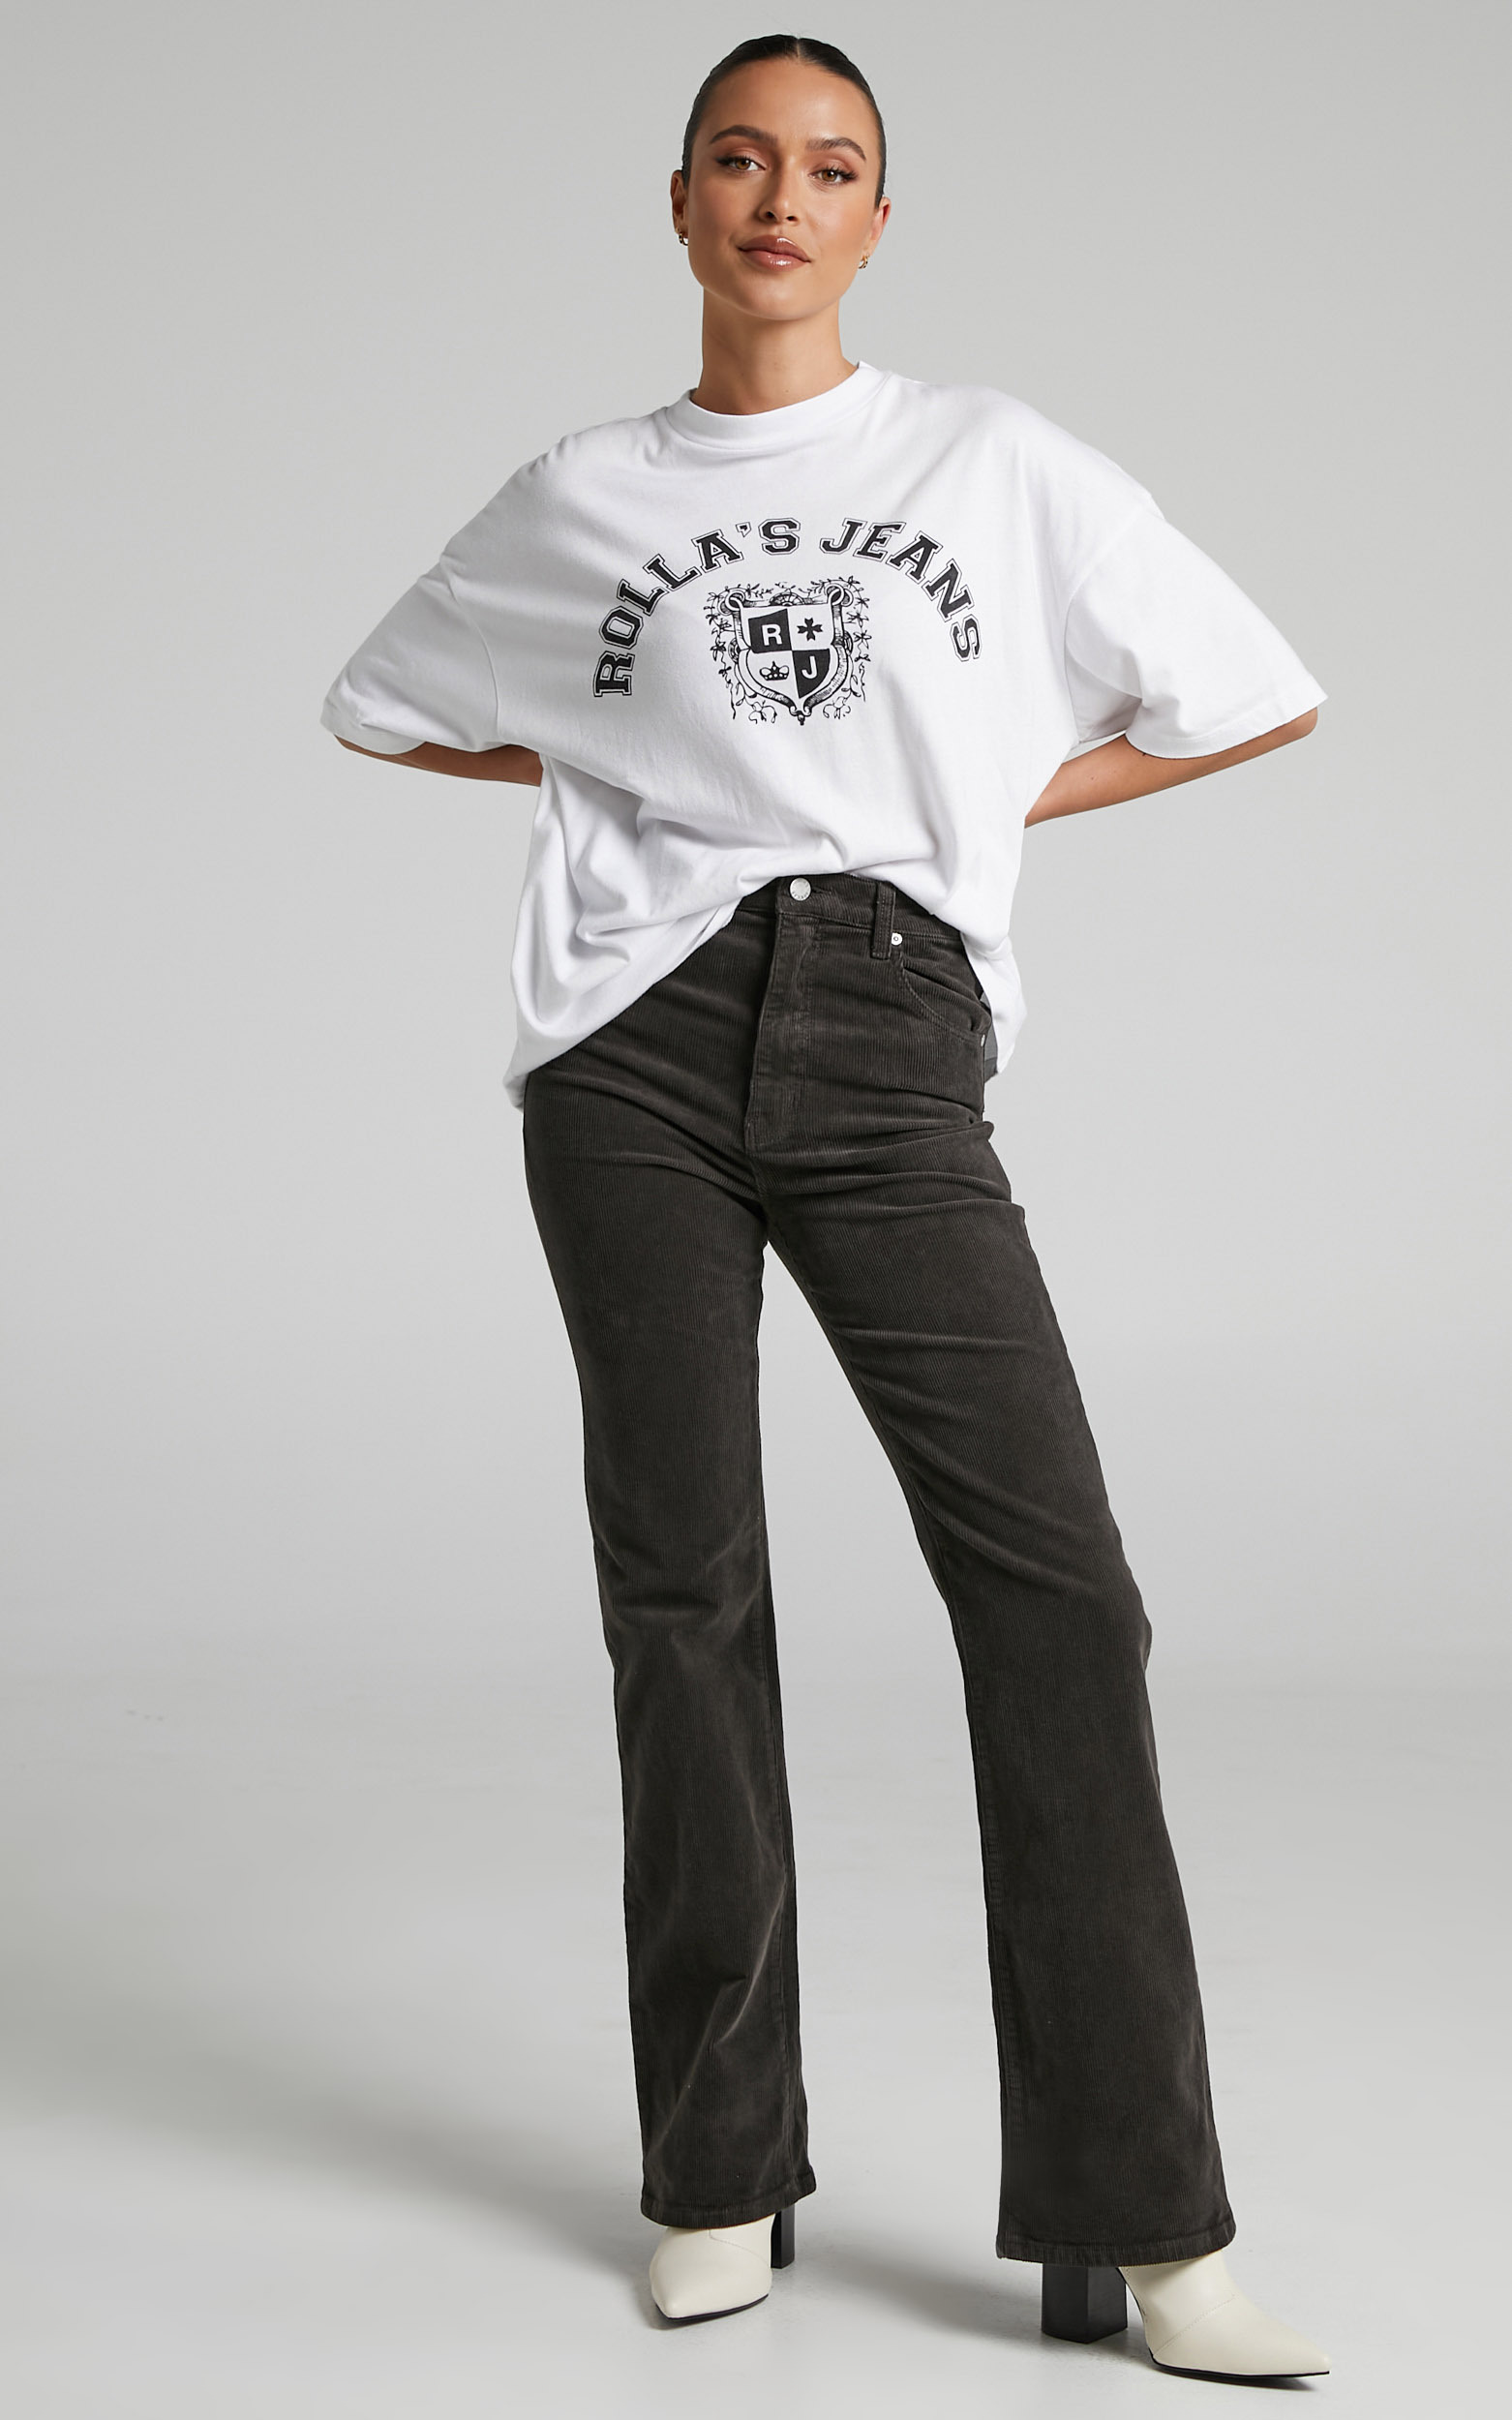 Phoebe Tonkin x Rolla's - GRADUATE SUPER SLOUCH TEE in White - L, WHT1, hi-res image number null